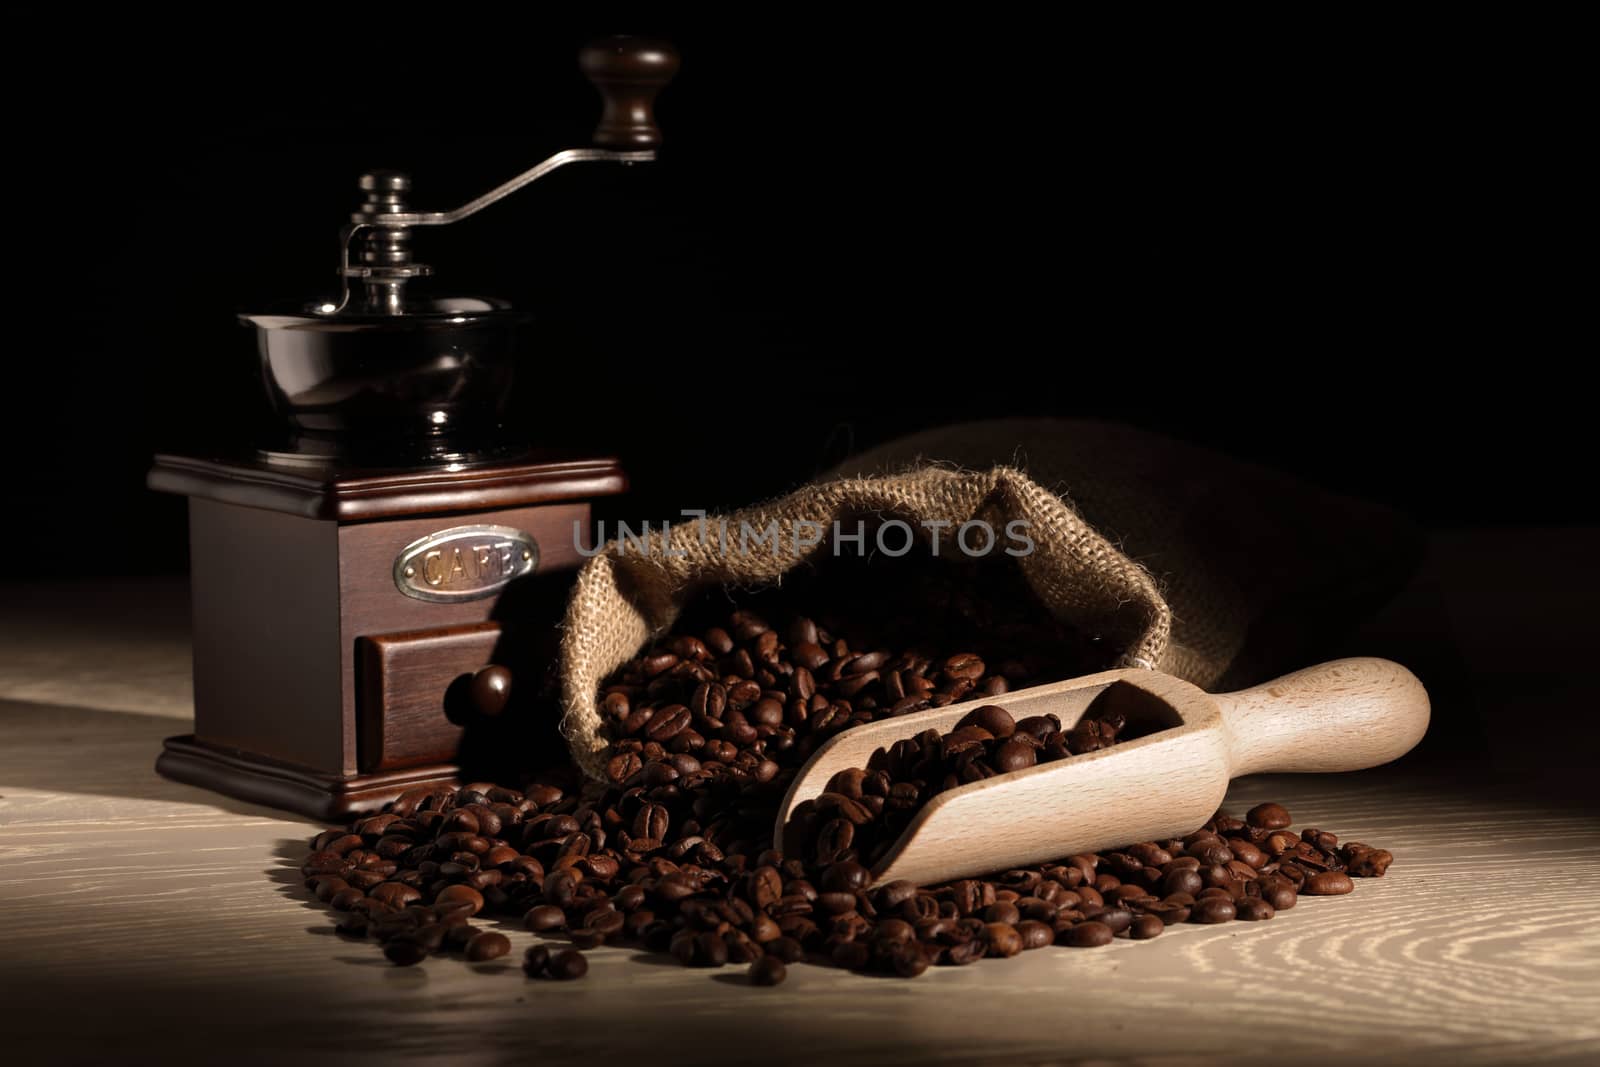 Coffee beans with a scoop grinder and hessian sack on wooden surface